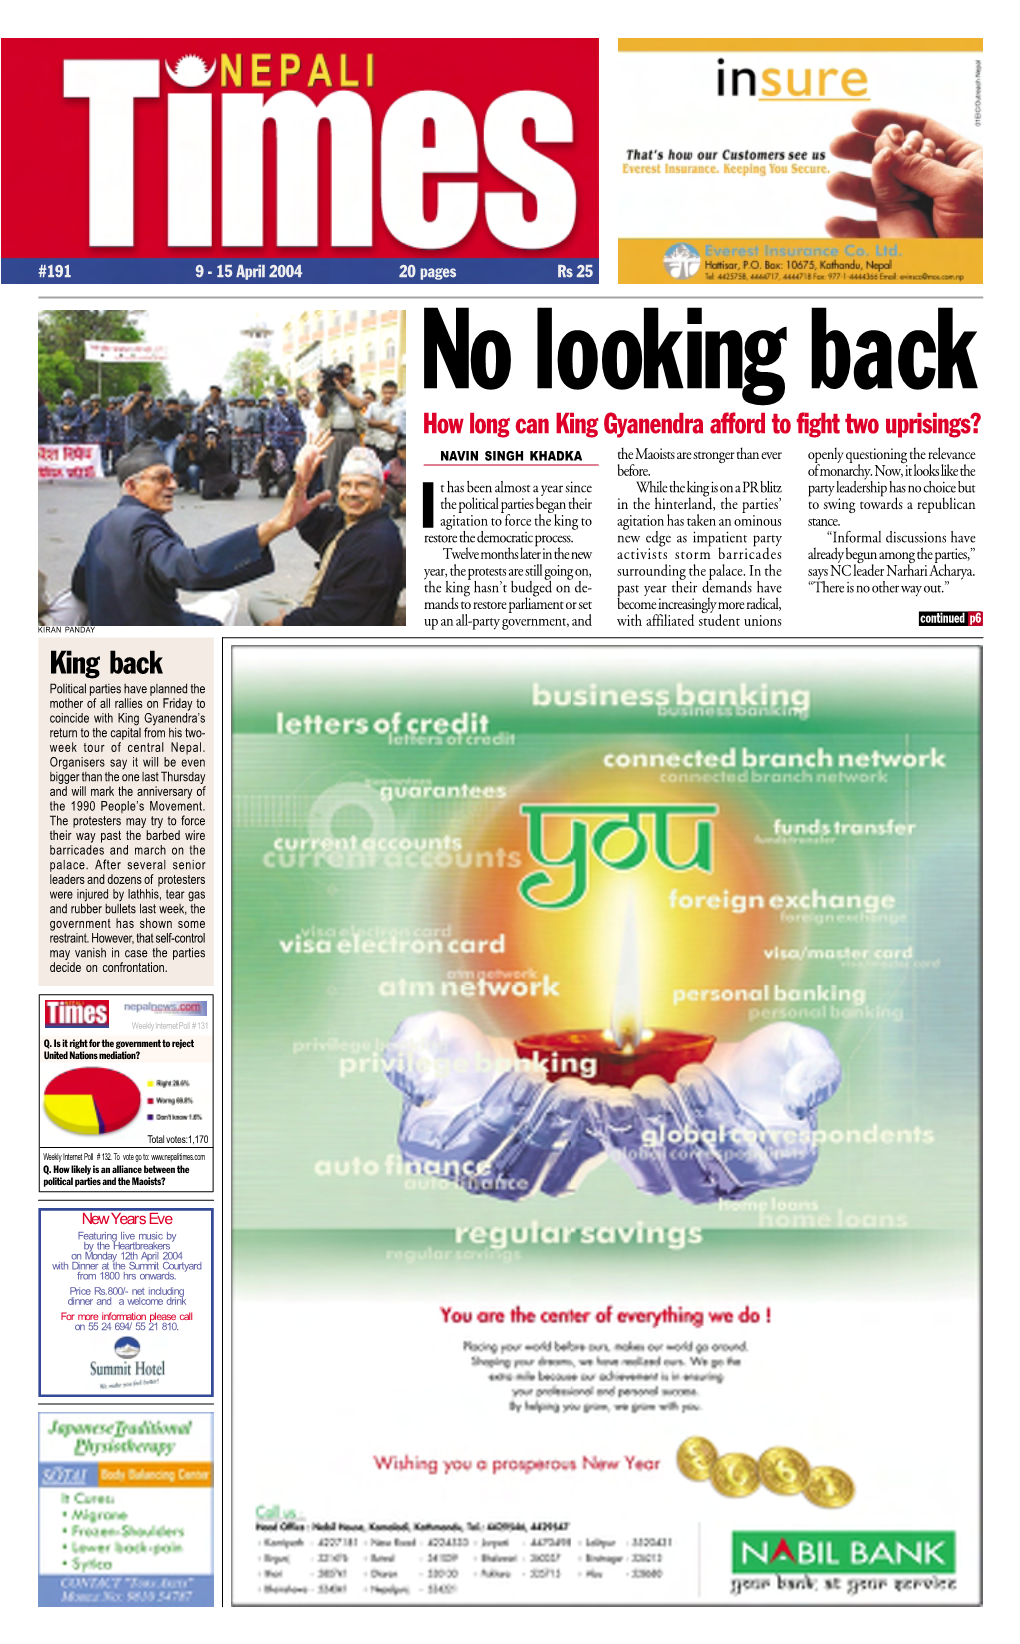 Nepali Times Would Print It Without Its Usual Strive Itself